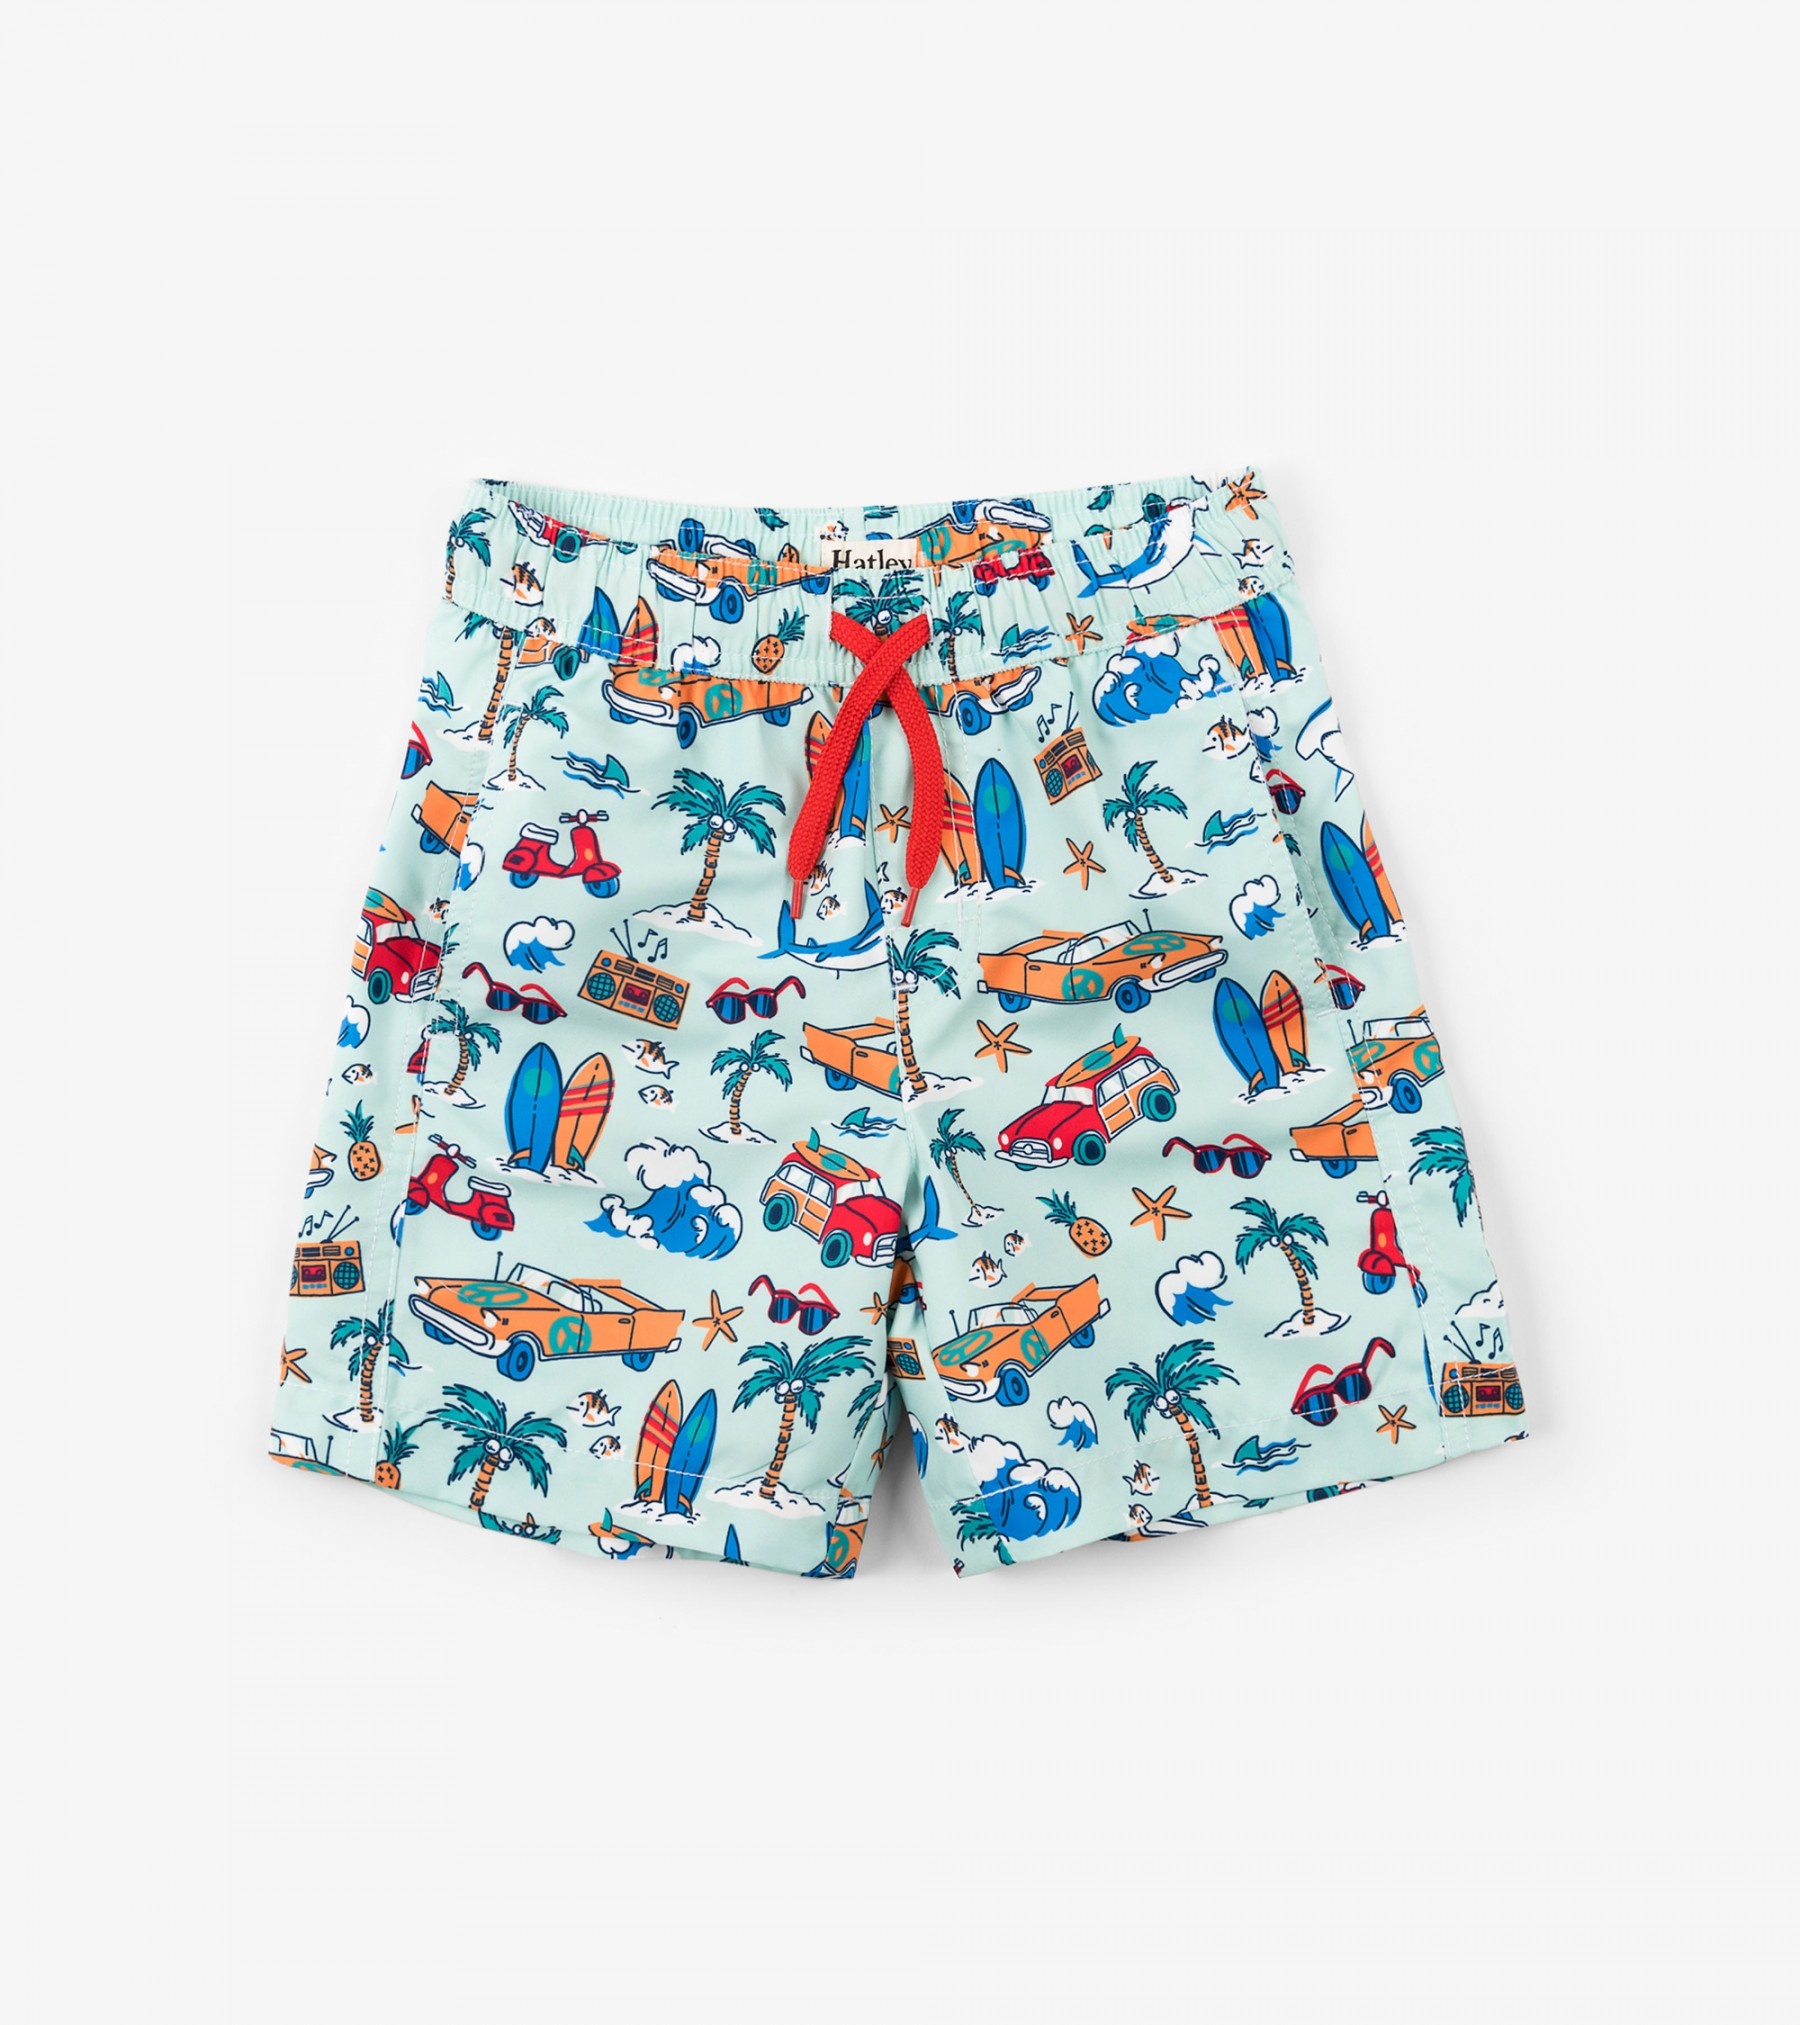 Boys Swim Trunks UPF 50 by Hatley in Victoria BC Canada at Abby